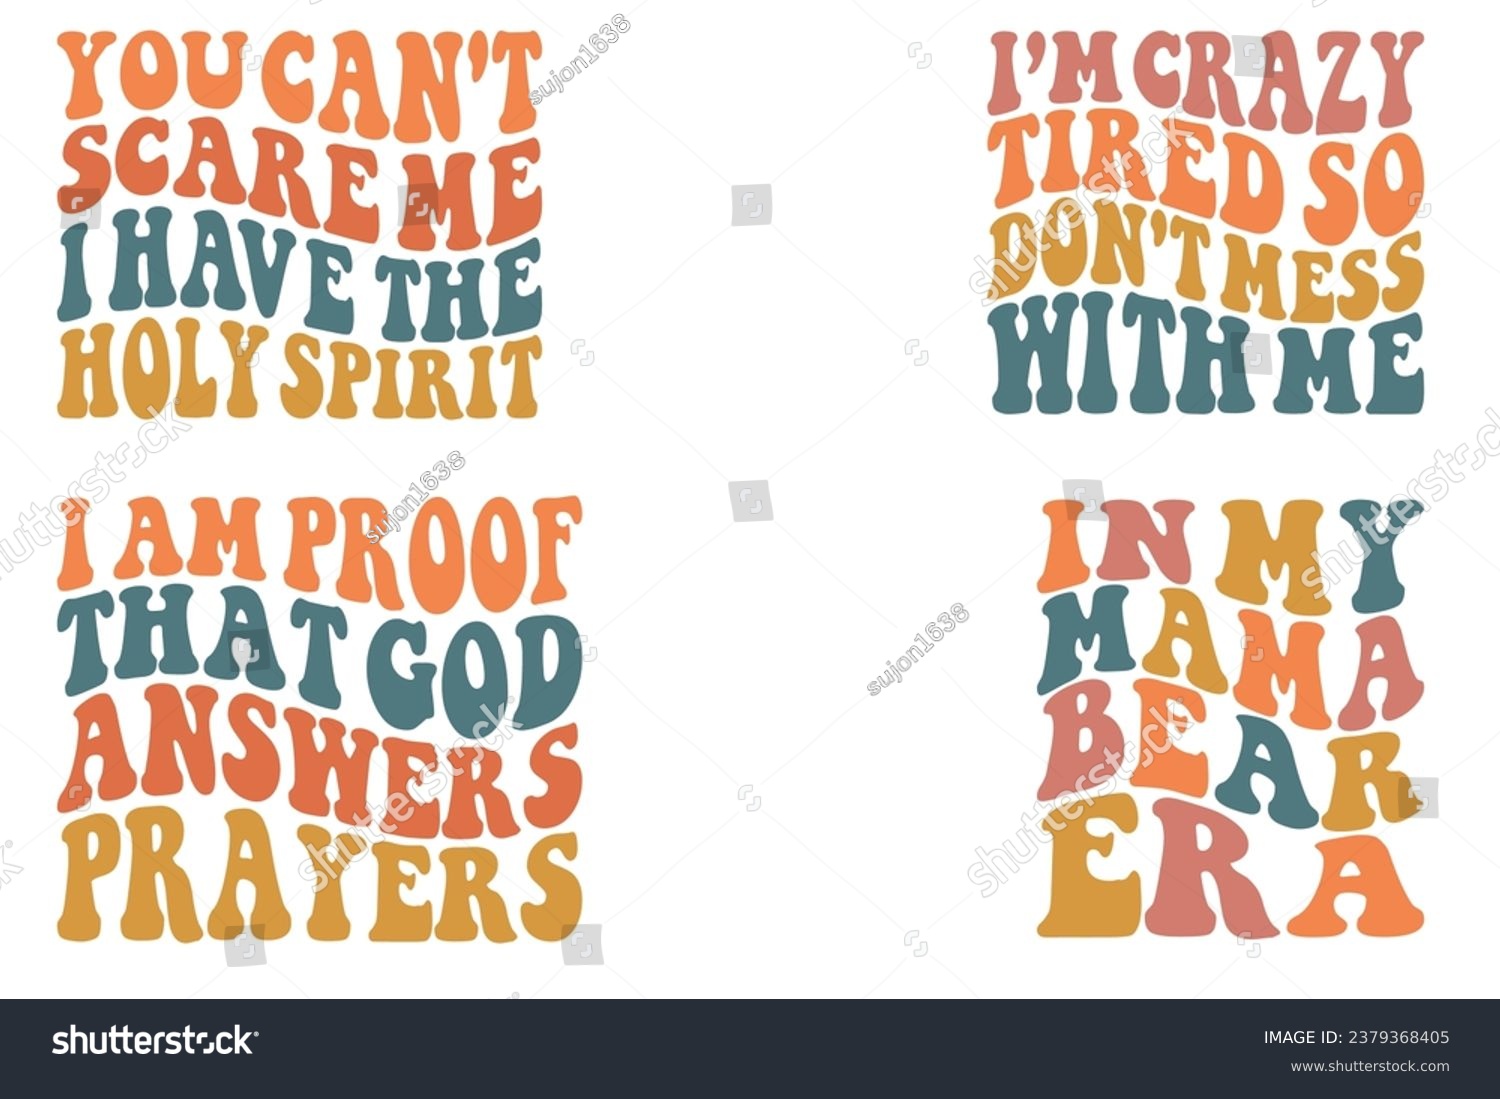 SVG of You Can't Scare Me I Have The Holy Spirit, I’m Crazy Tired So Don't Mess With Me, I Am Proof That God Answers Prayers, In My Mama Bear Era retro wavy  T-shirt svg